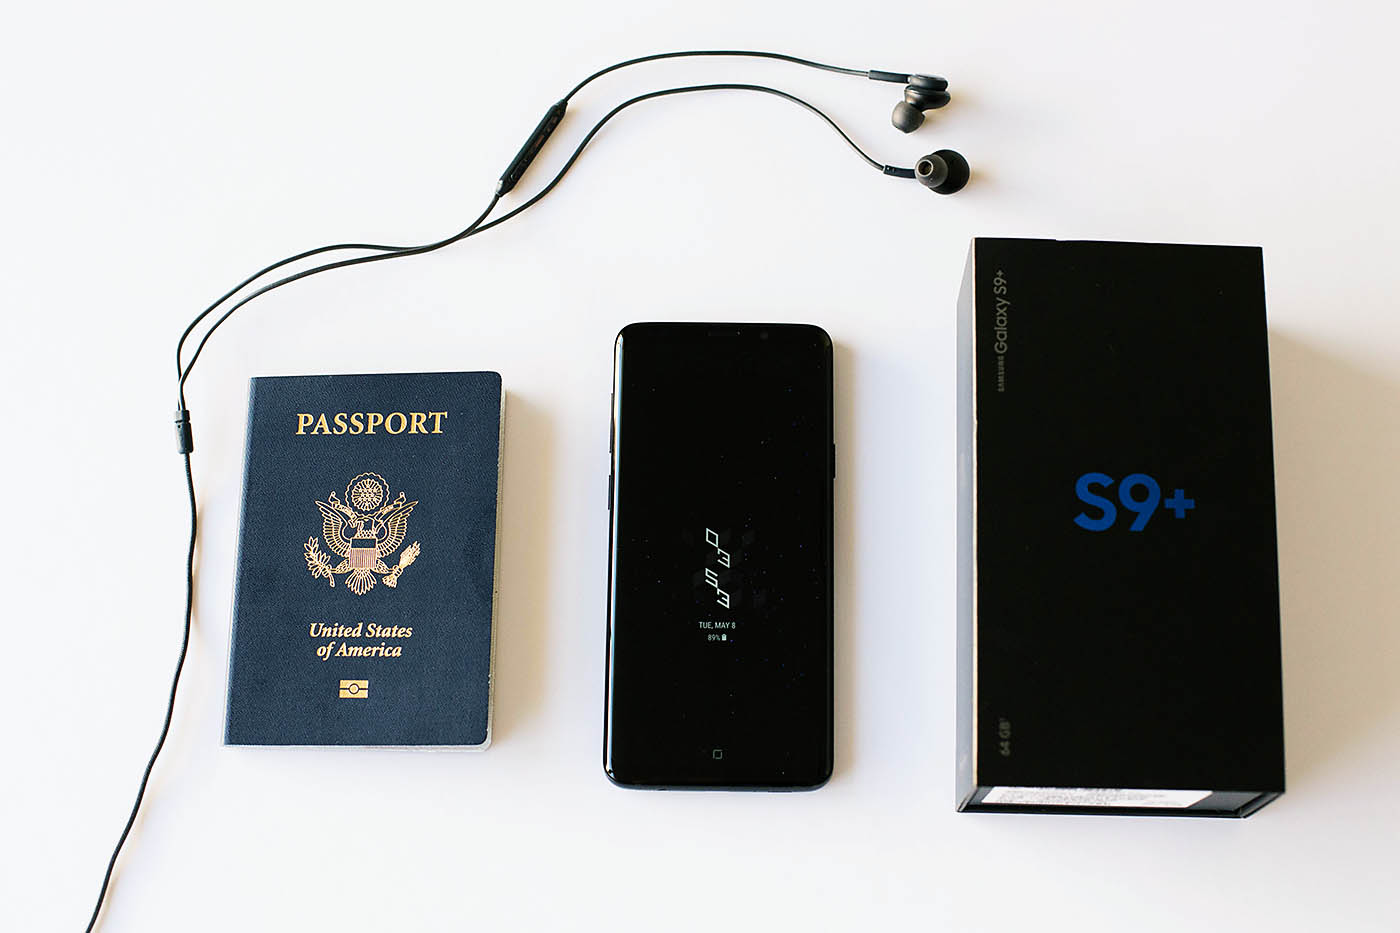 Why the Samsung S9+ is a great phone for travelers